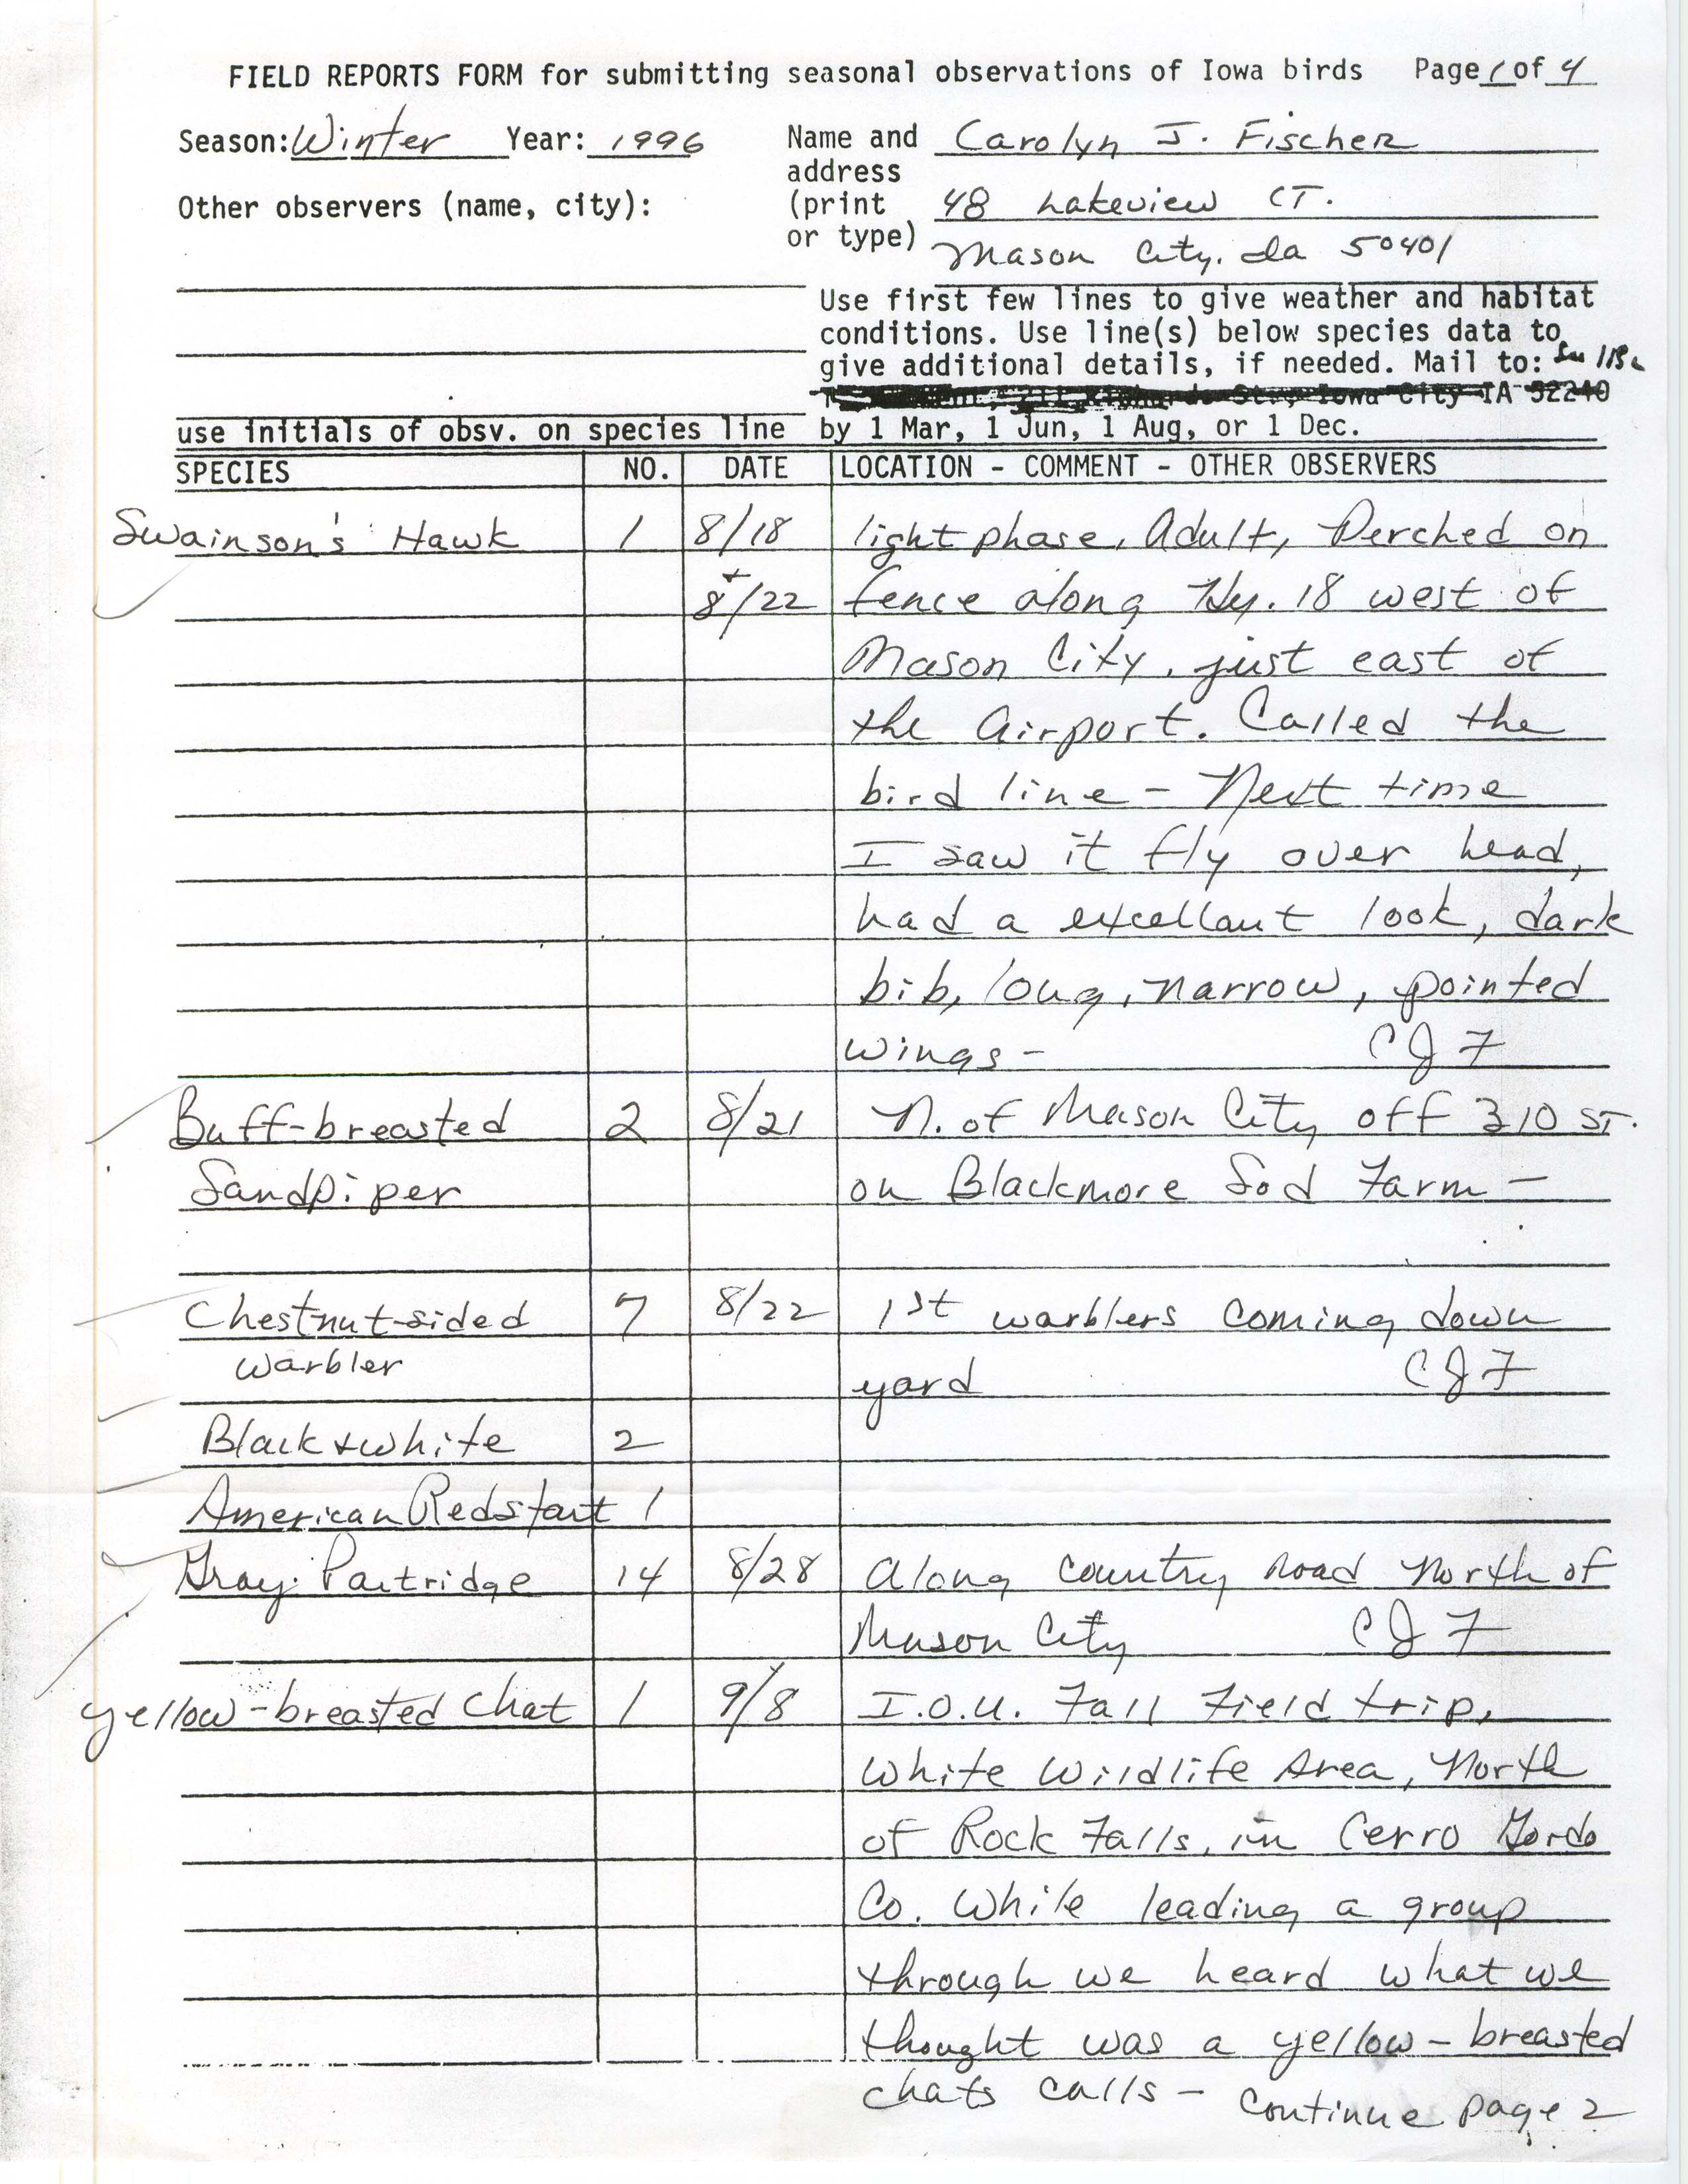 Field reports form for submitting seasonal observations of Iowa birds, Carolyn J. Fischer, fall 1996